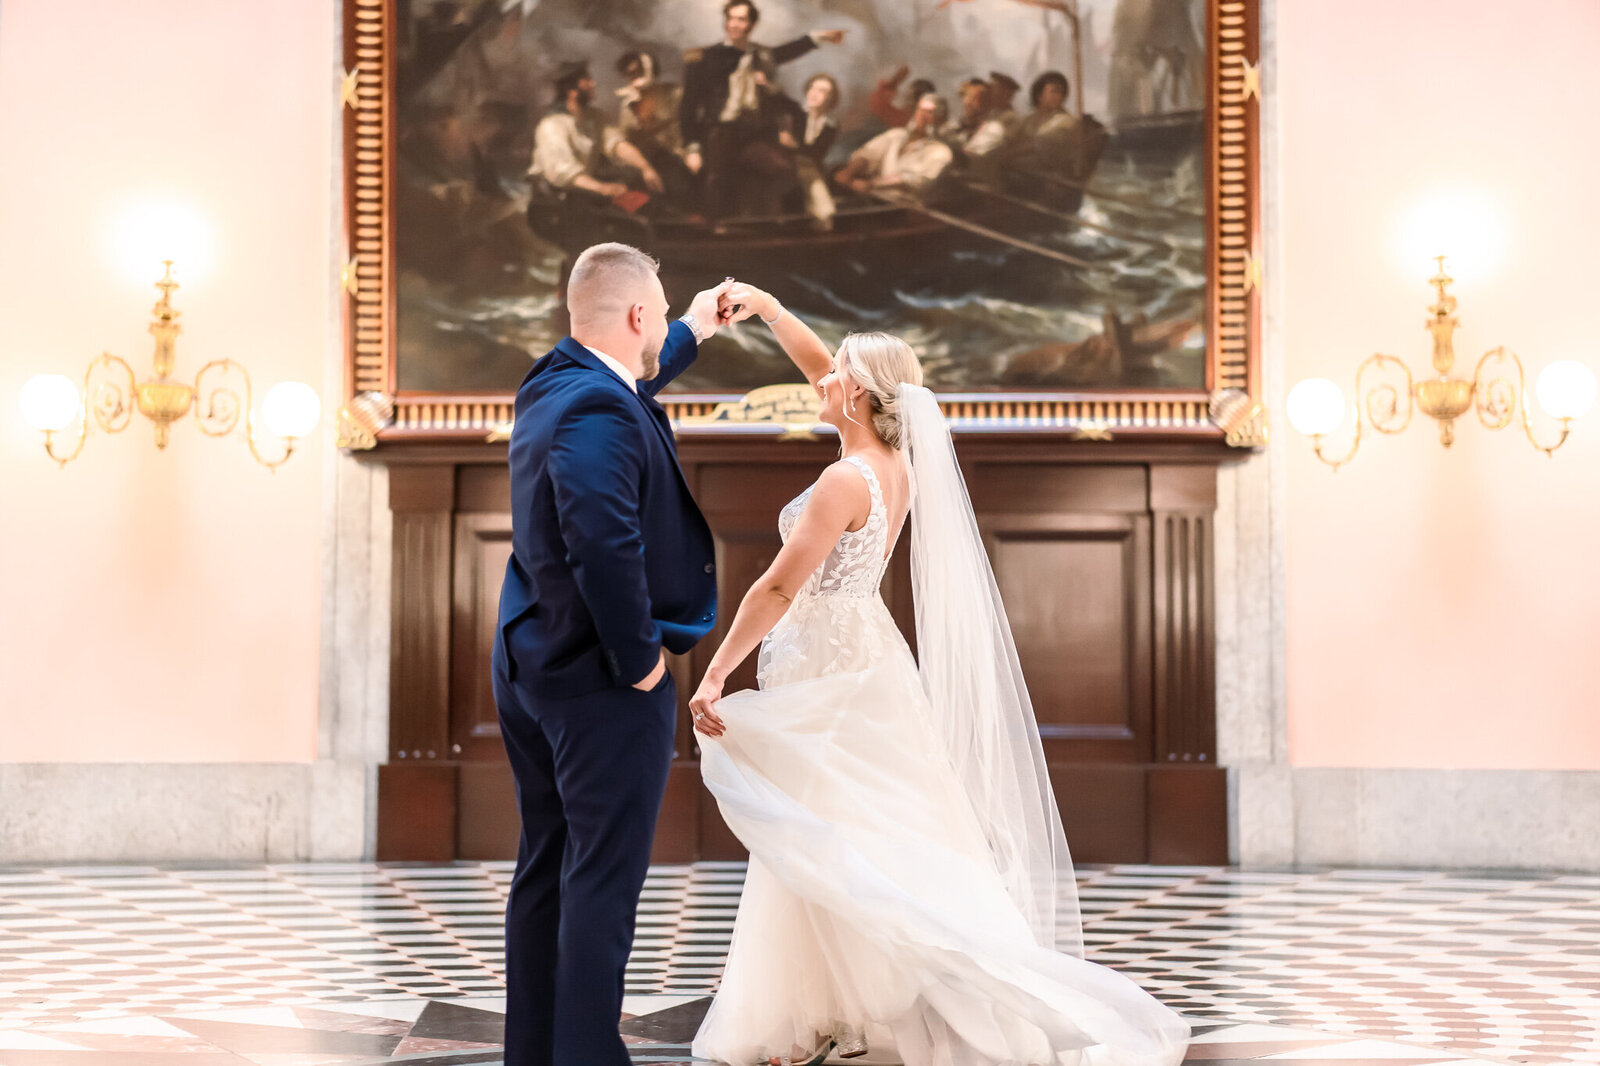 Bride and groom, Rachel and Jeff, dancing in front of a painting at the Ohio State House in Columbus.